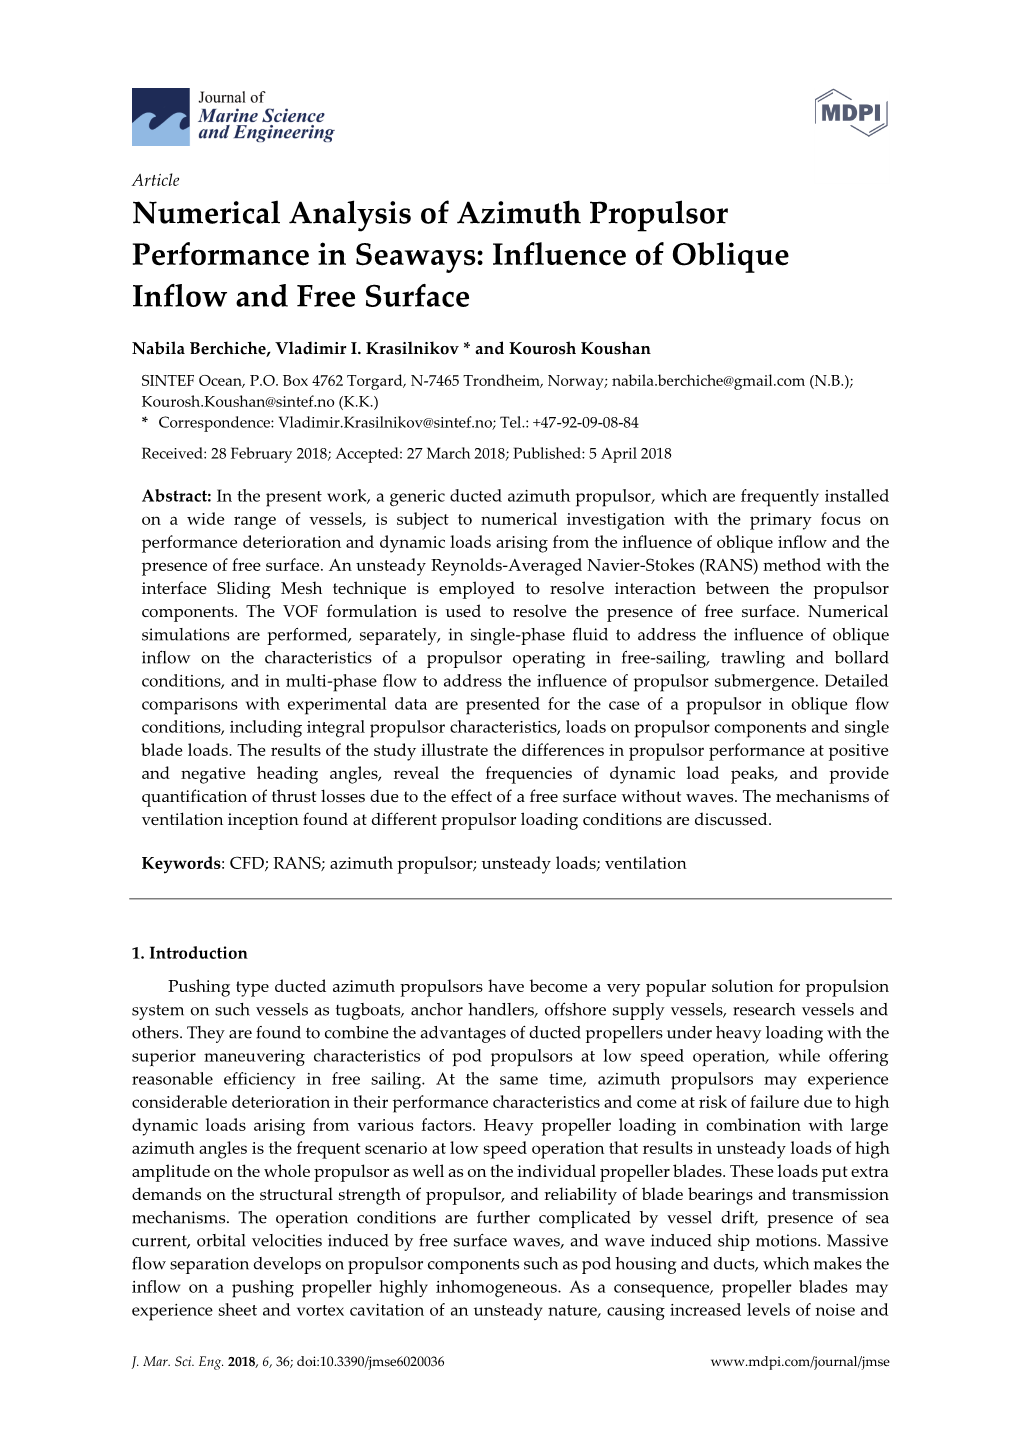 Numerical Analysis of Azimuth Propulsor Performance in Seaways: Influence of Oblique Inflow and Free Surface